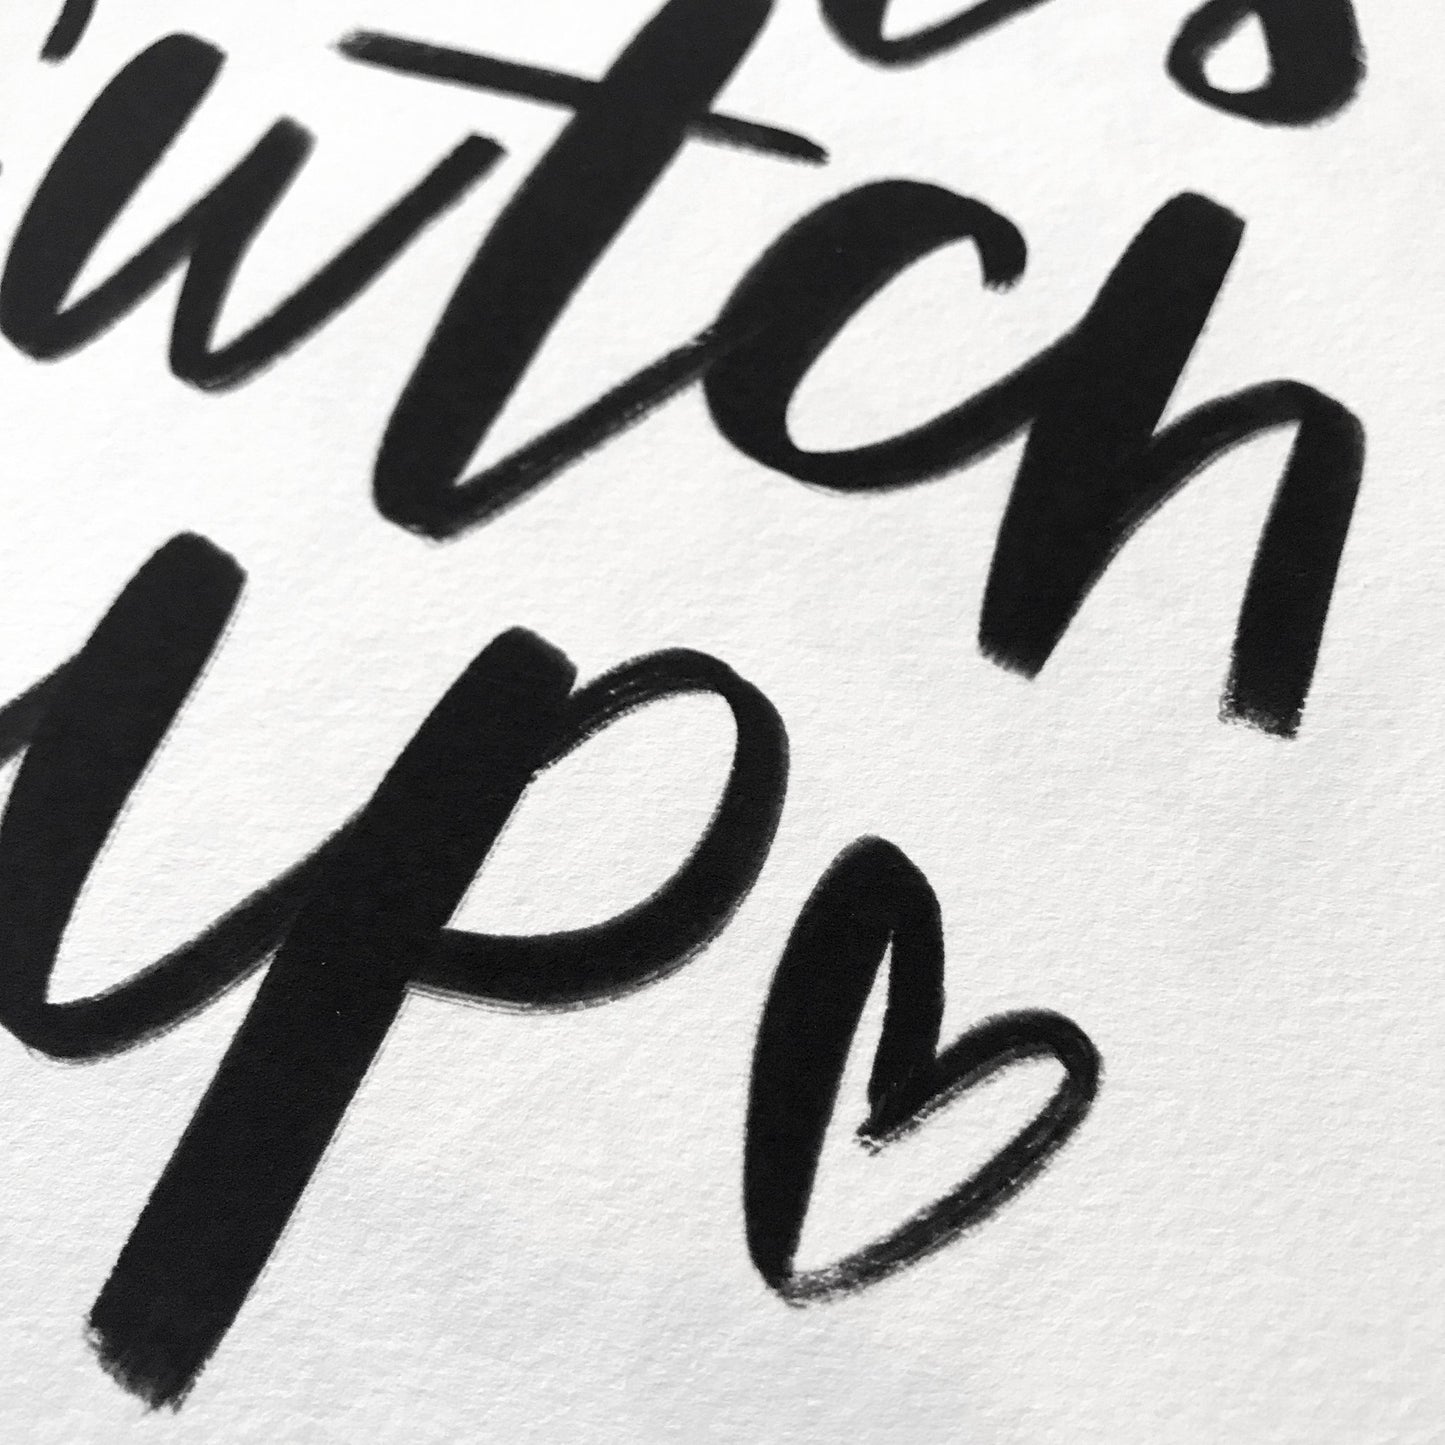 Print - Let's Cwtch Up